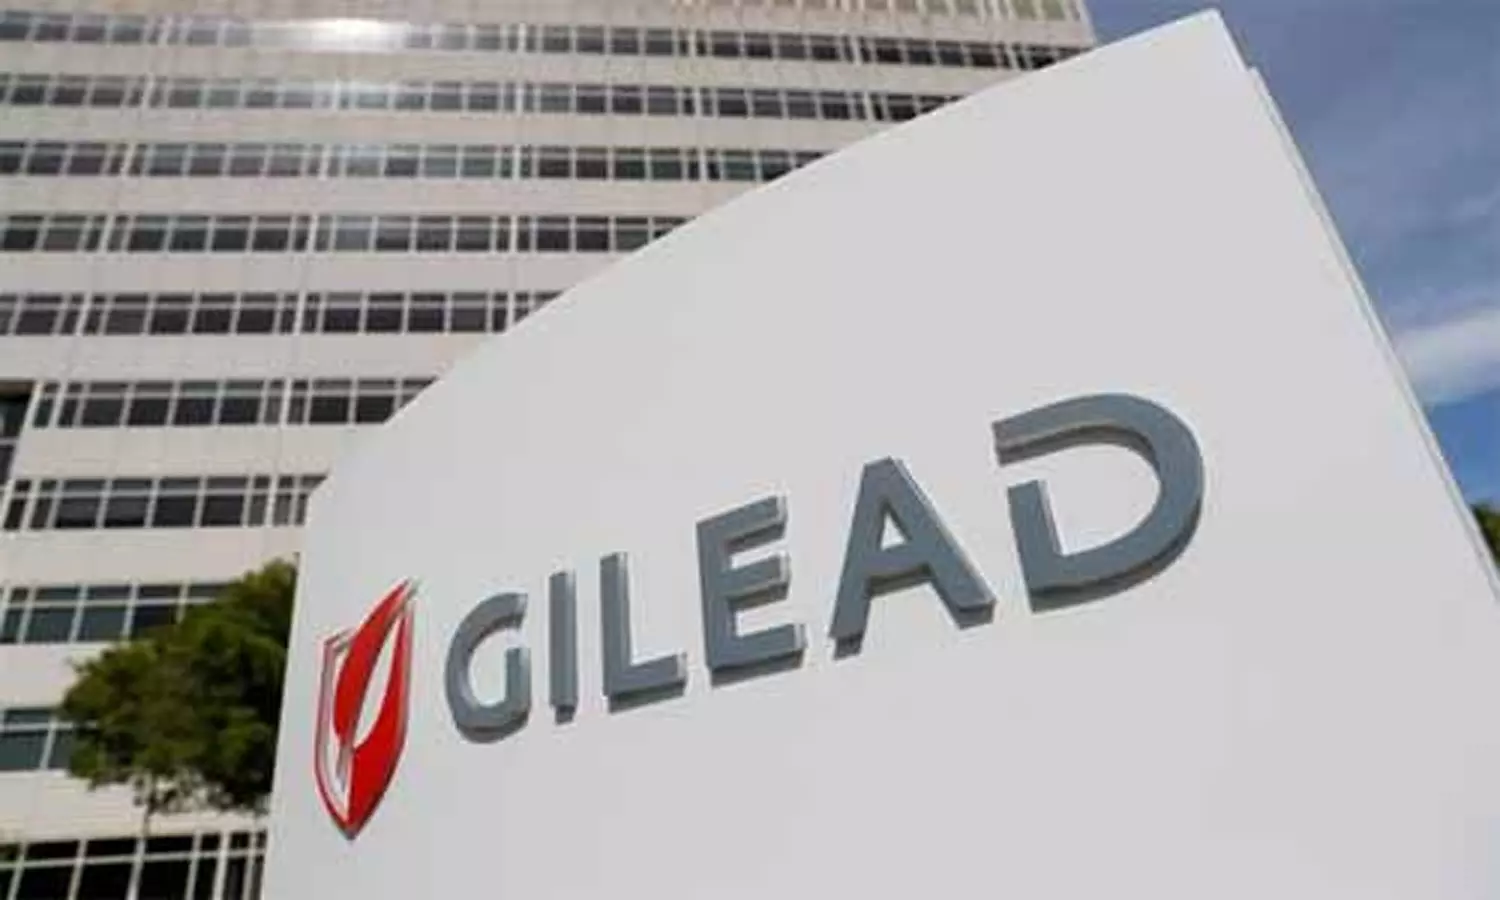 Gilead Sciences settles patent disputes with Lupin, Cipla and 3 others over HIV,  Hepatitis B drugs generic versions